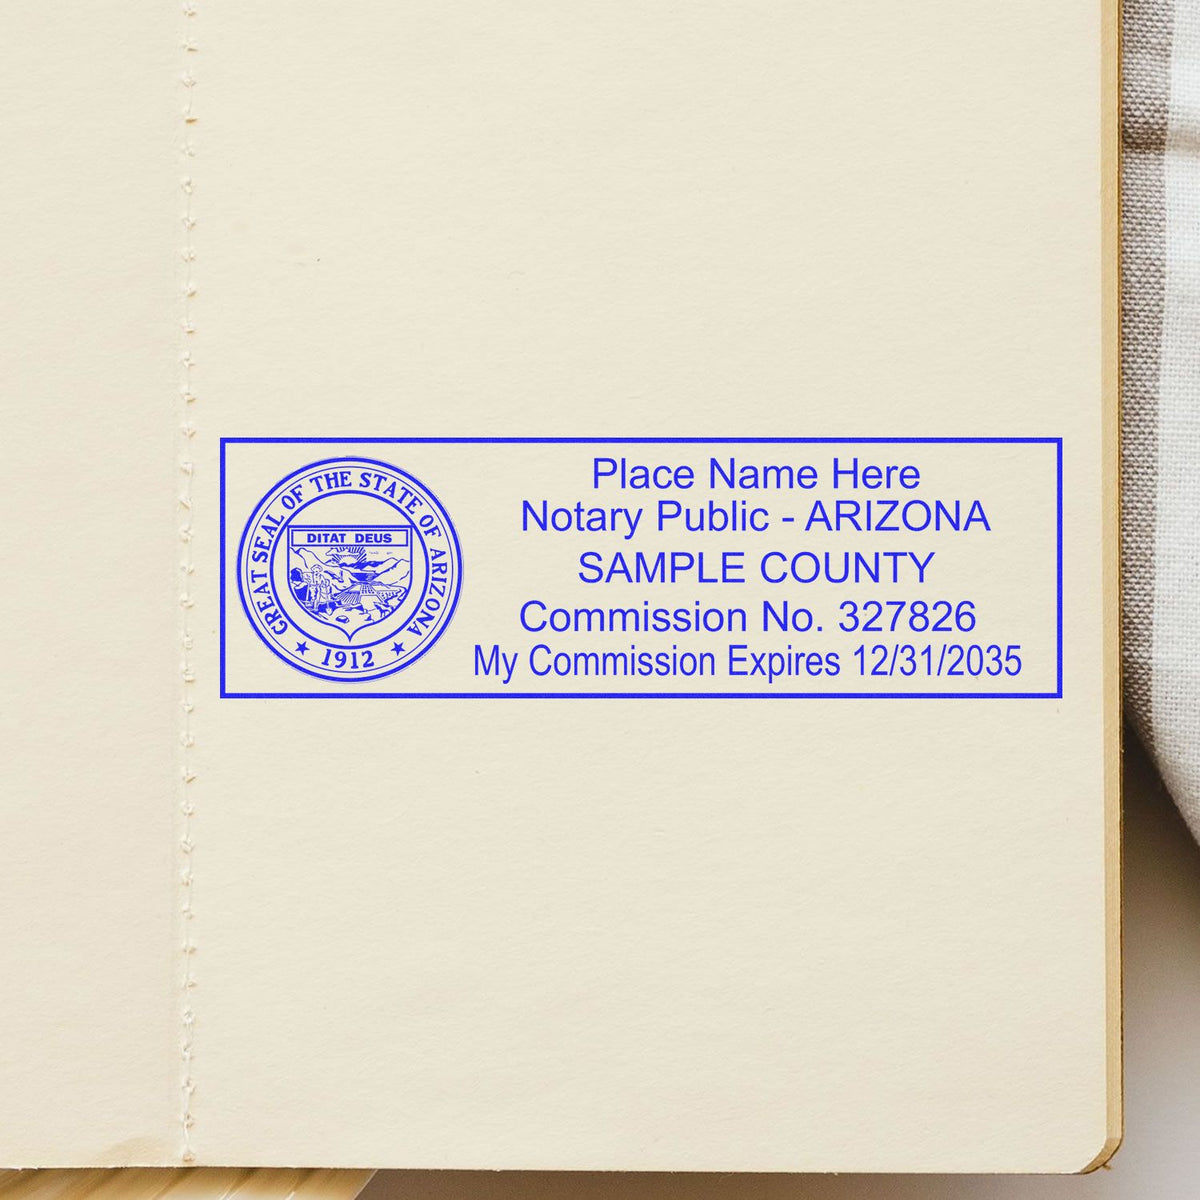 The PSI Arizona Notary Stamp stamp impression comes to life with a crisp, detailed photo on paper - showcasing true professional quality.